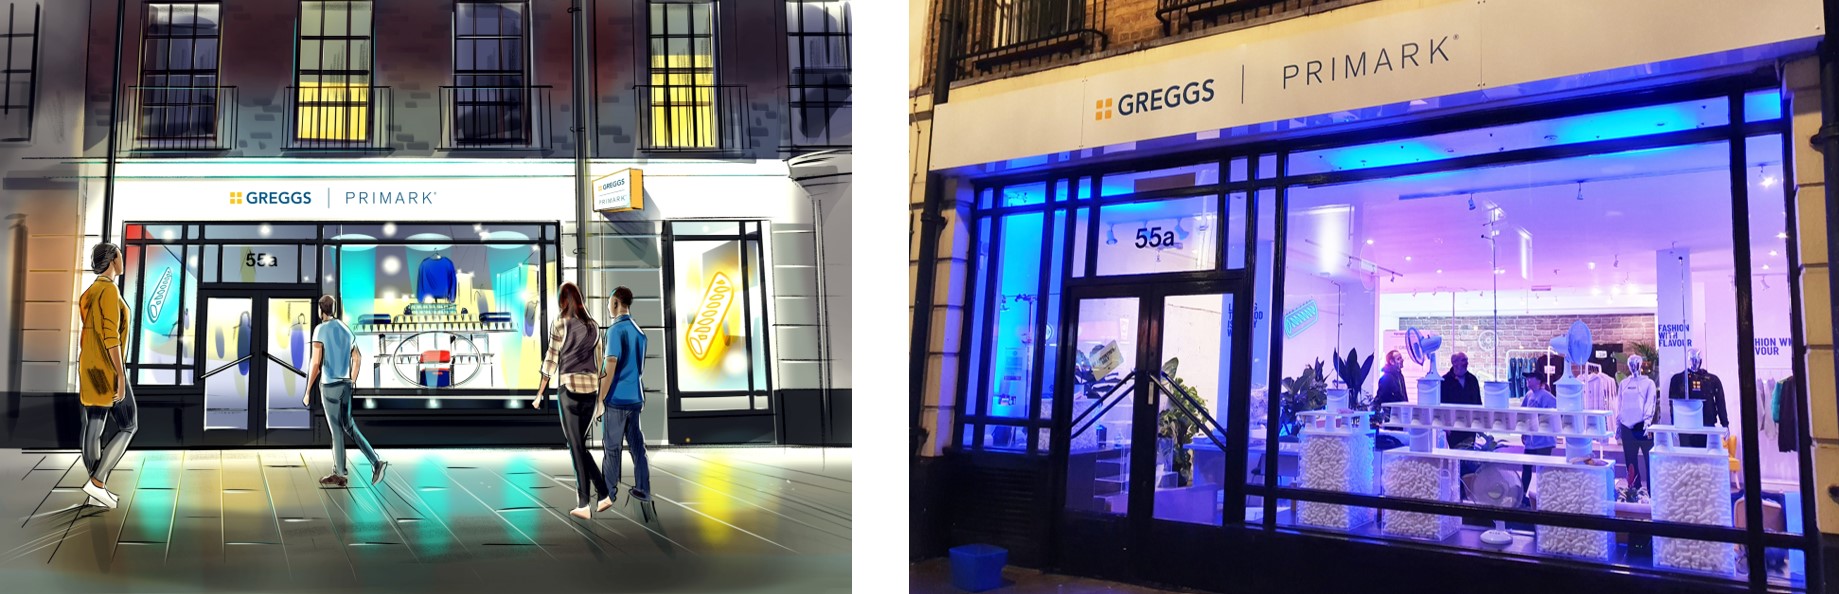 The Greggs x Primark exclusive fashion collaboration you never knew you  needed